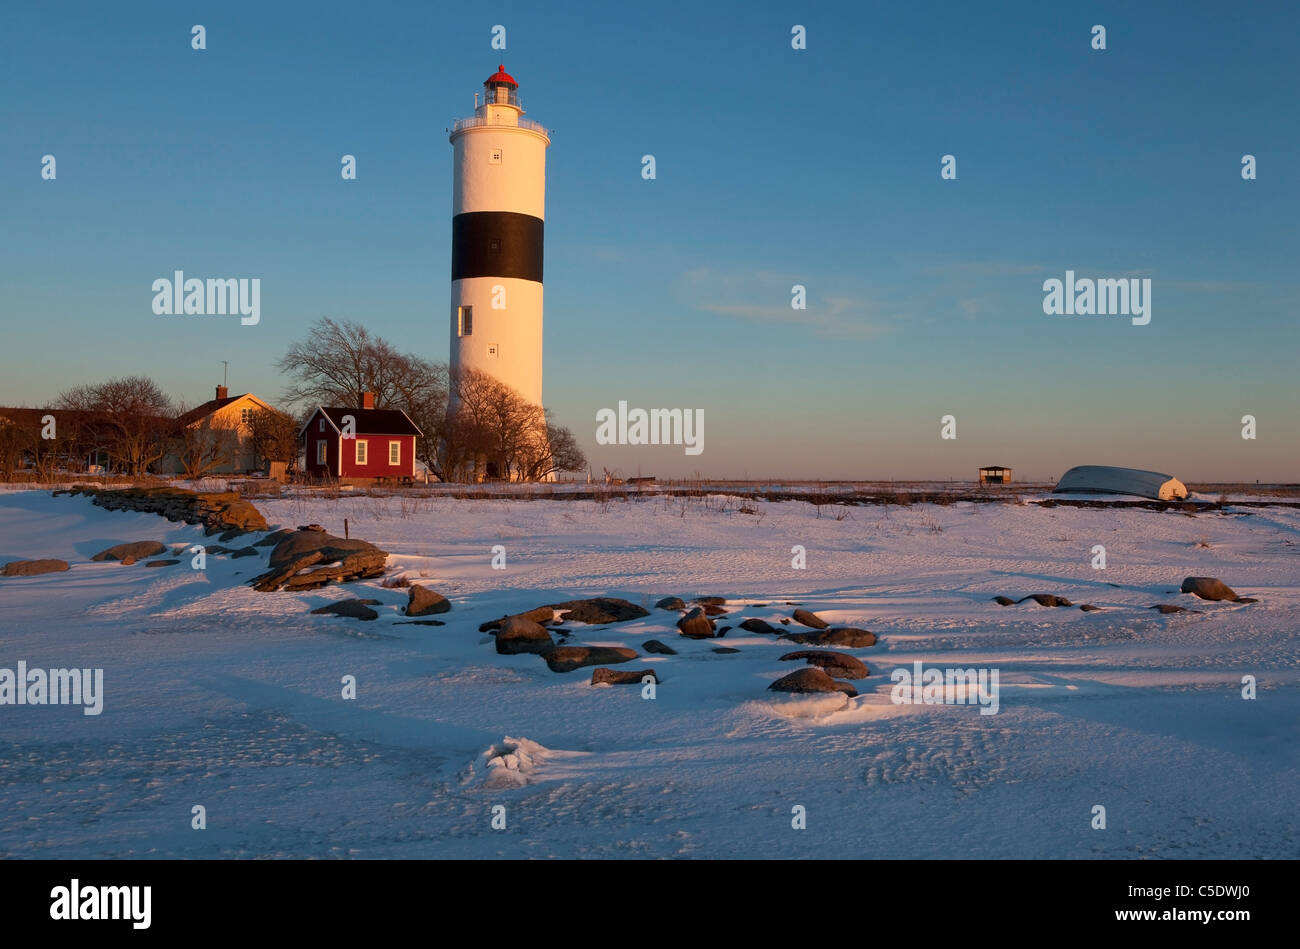 The lighthouse against clear blue sky with peaceful snowed land in foreground at Oland, Sweden Stock Photo